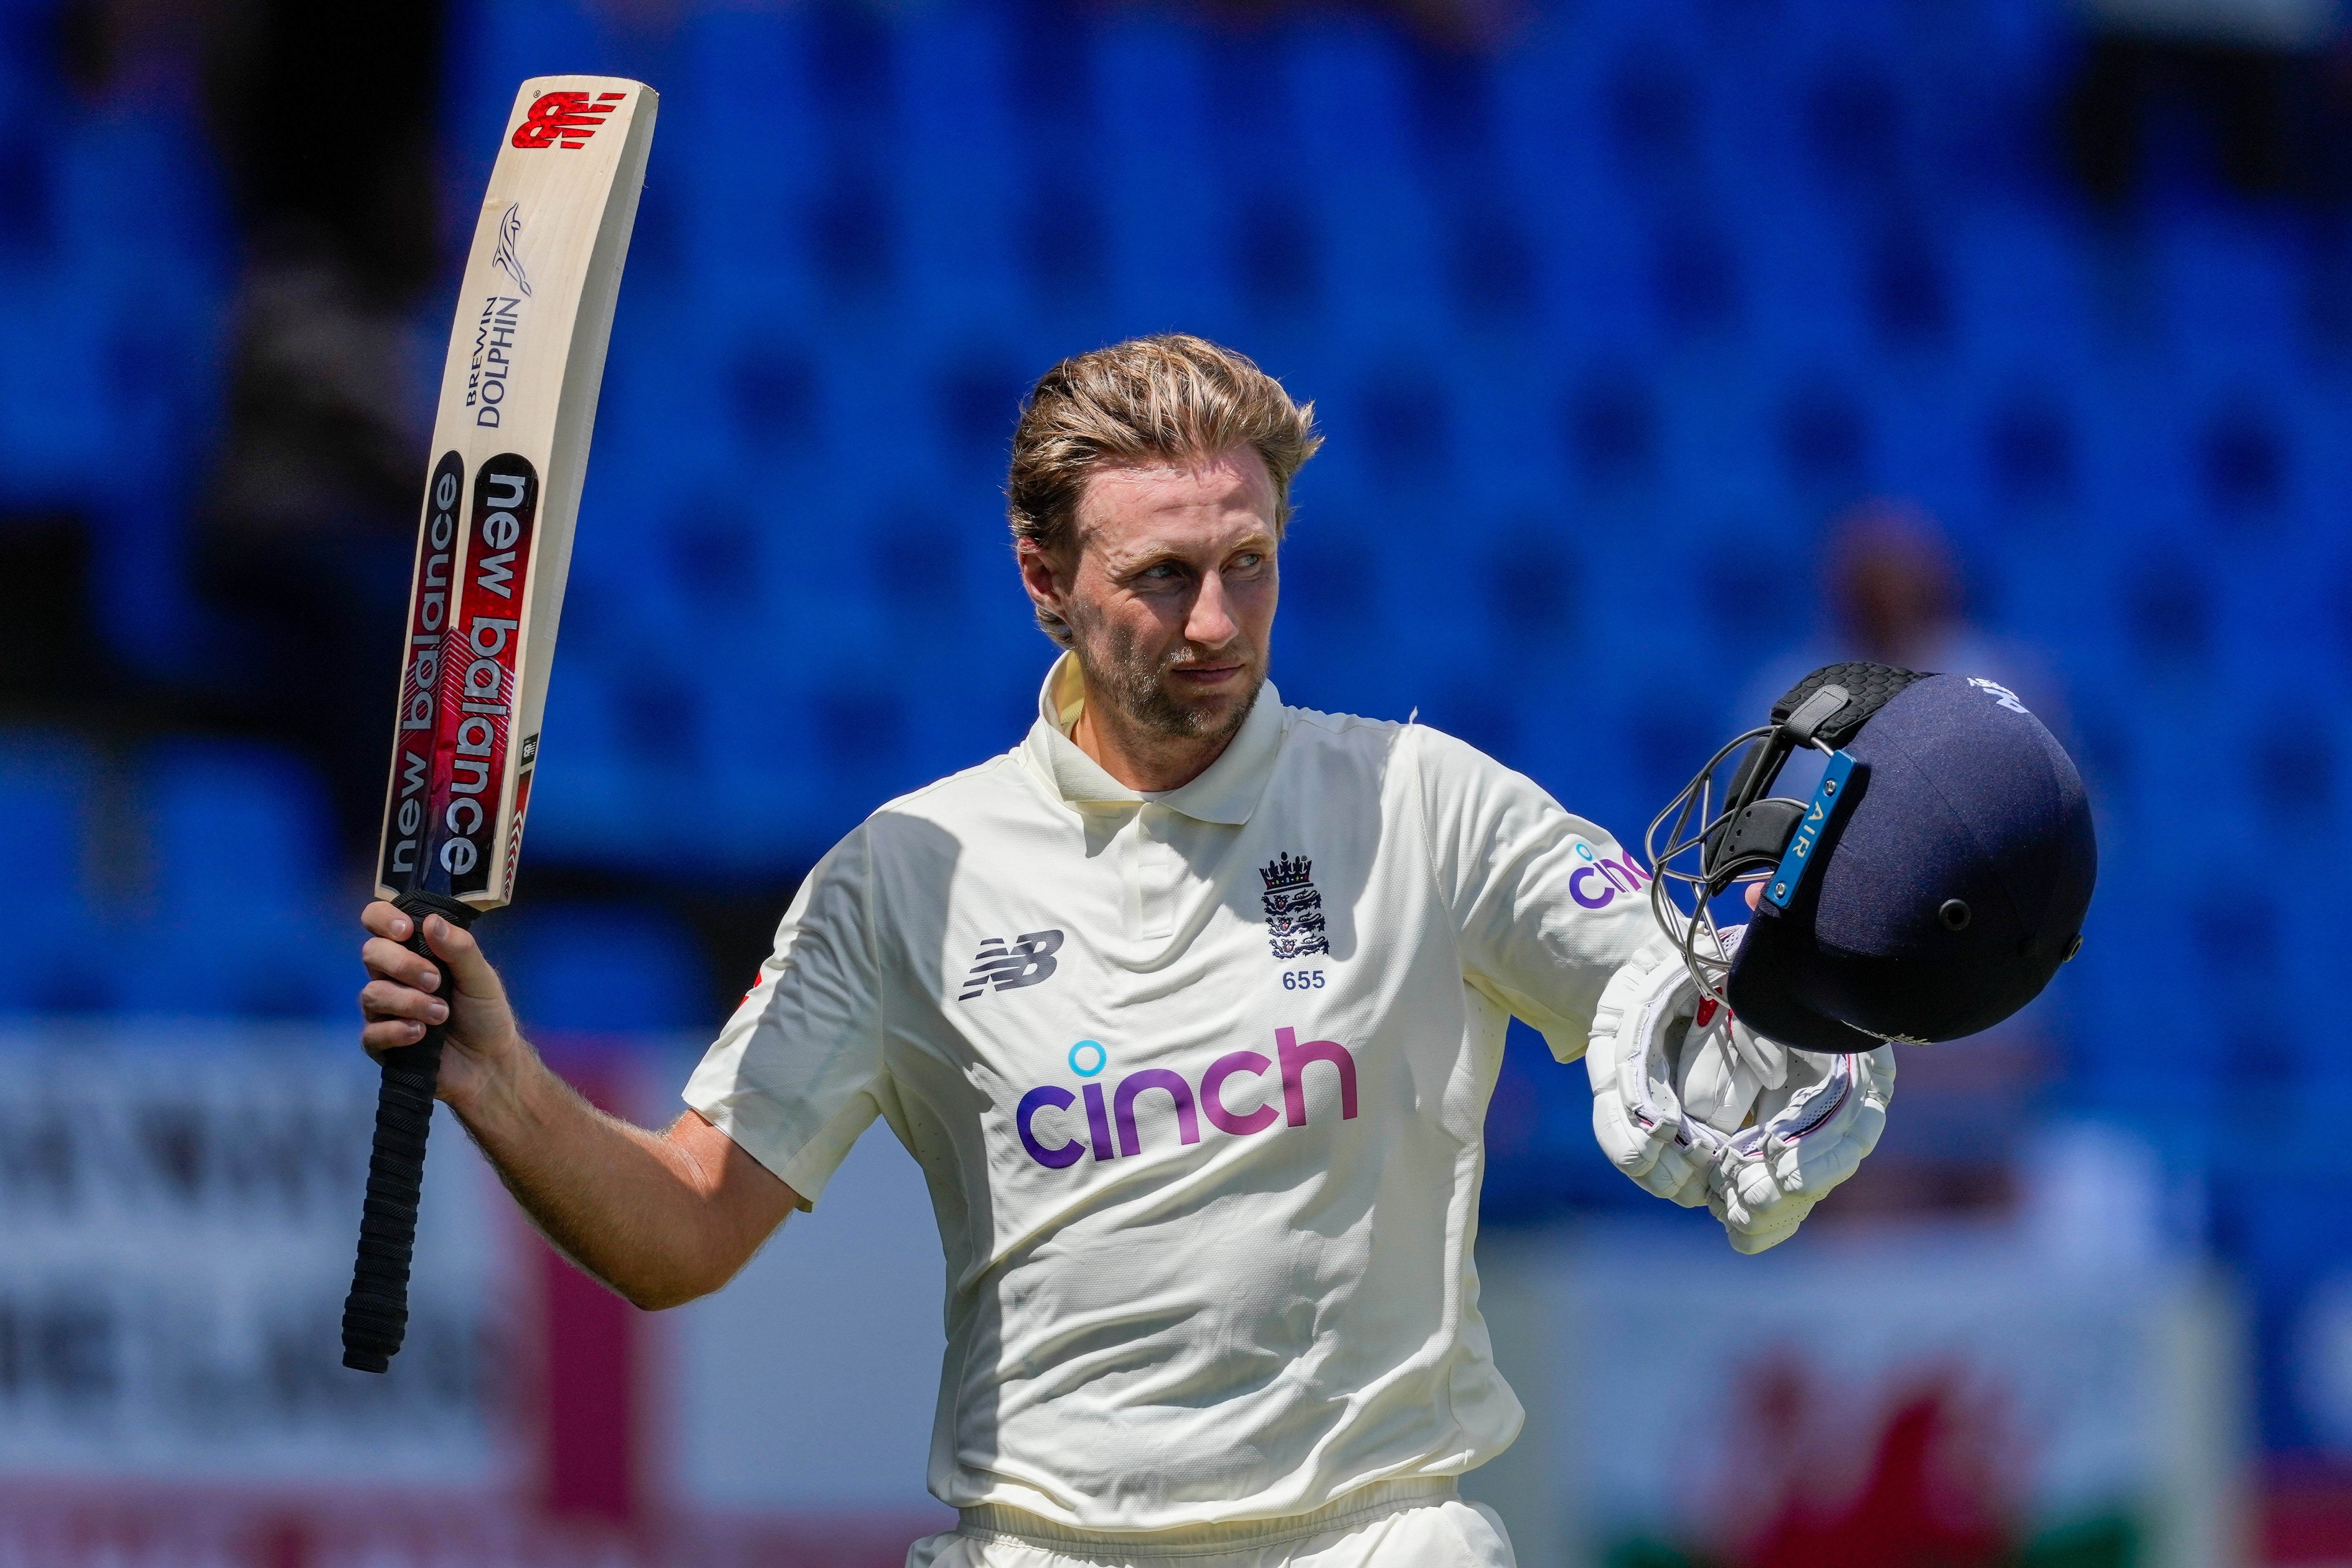 England captain Joe Root reached a century on the fifth day but the first Test against West Indies in Antigua ended in a draw (Ricardo Mazalan/AP)